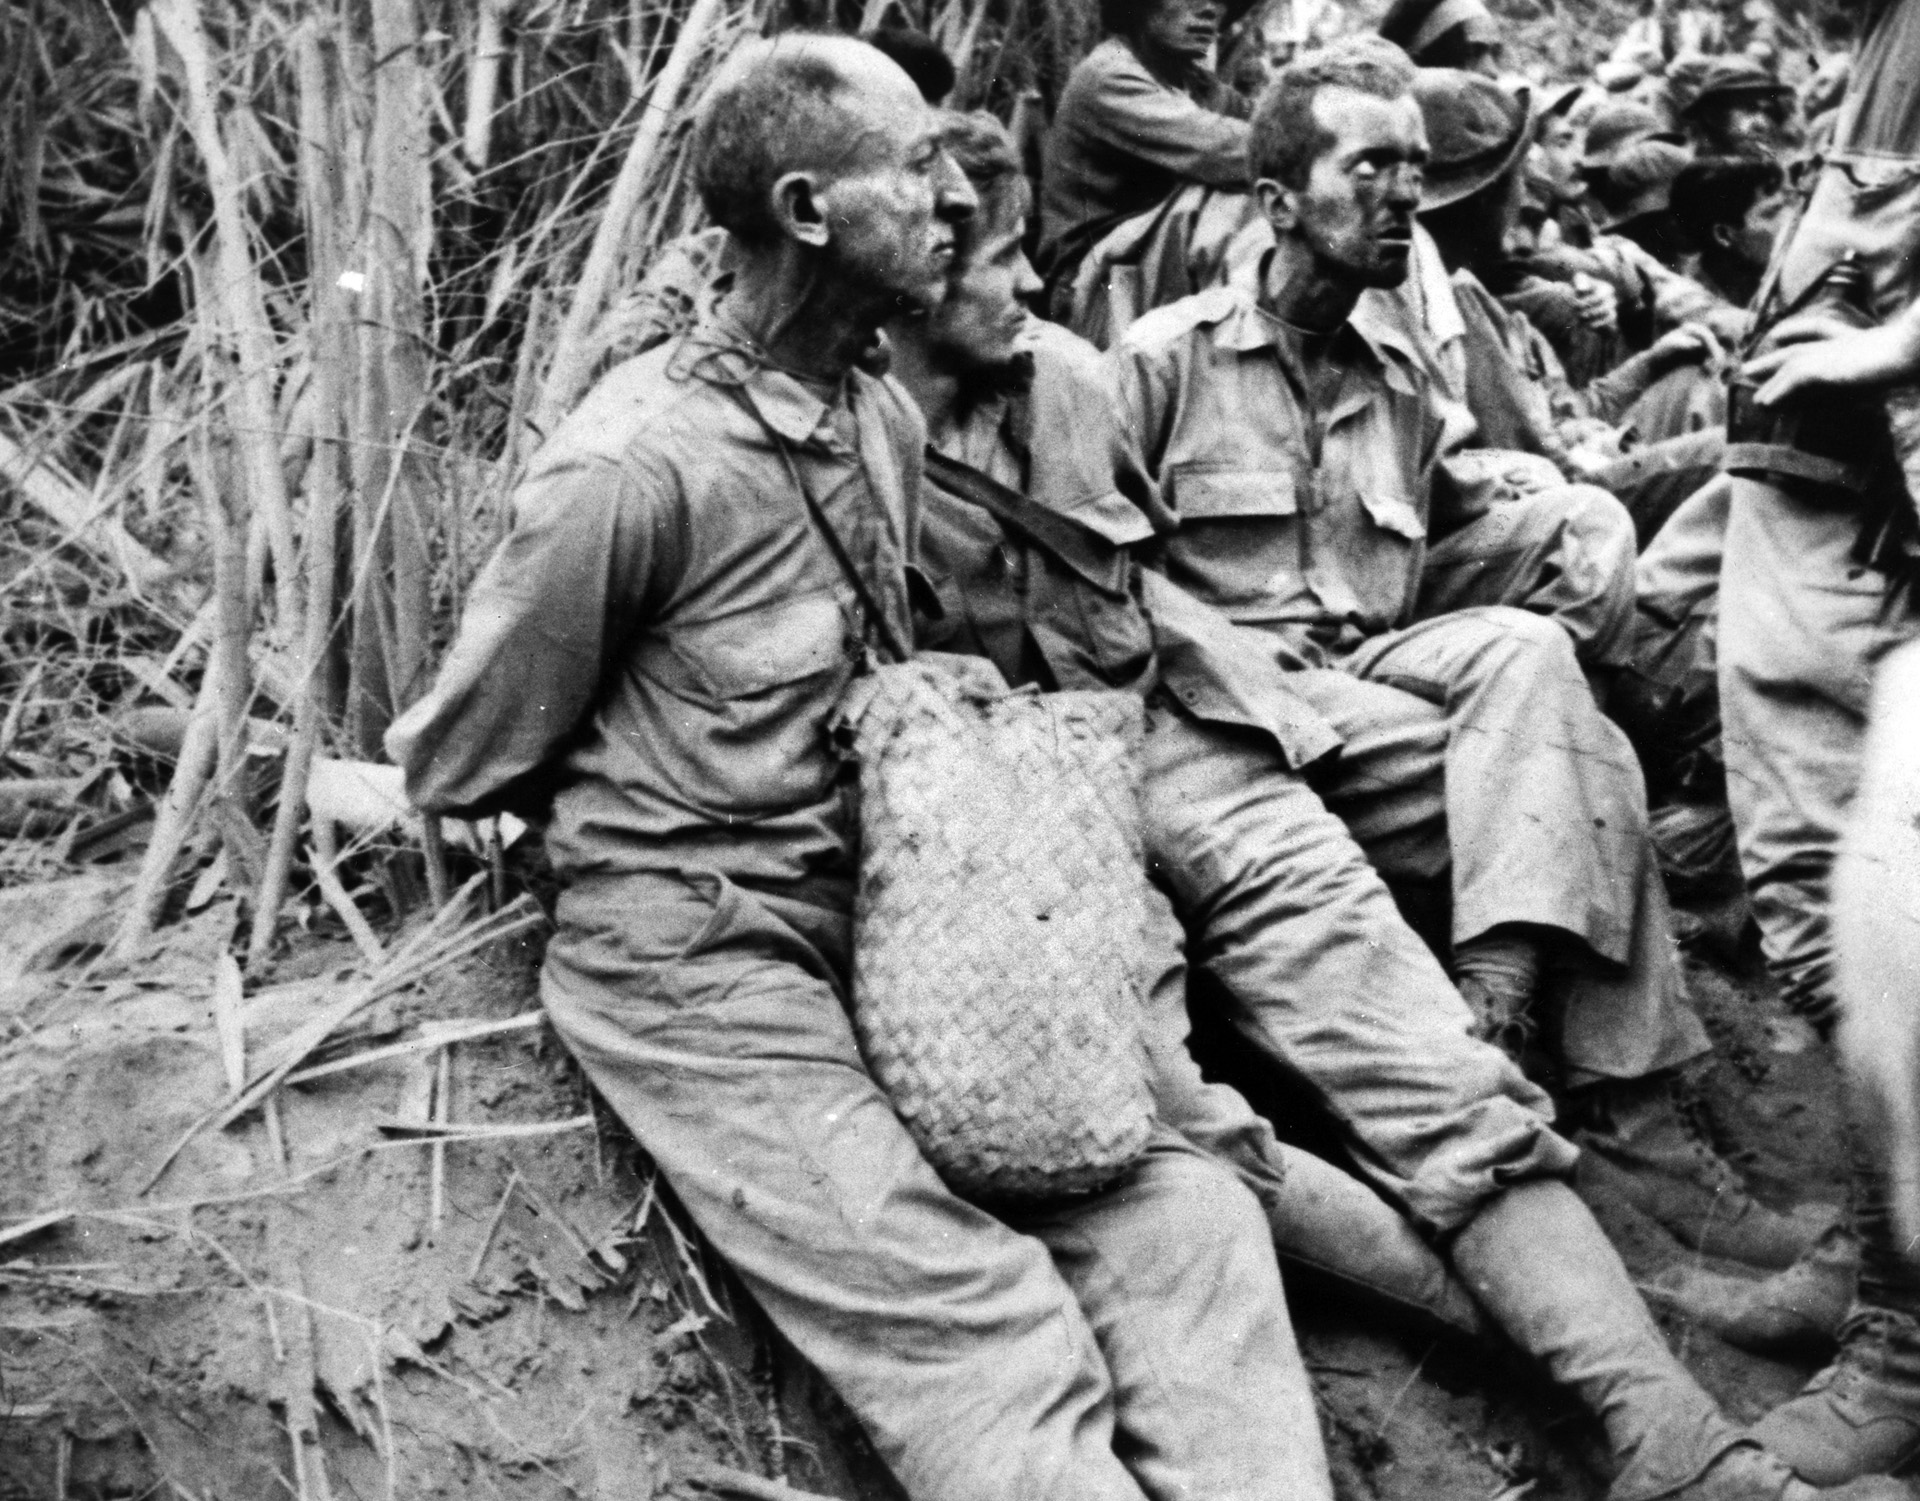 American soldiers, their hands tied behind their backs, briefly rest during the 66-mile Bataan Death March from Saysain Point, Bagac, Bataan and Mariveles to Camp O'Donnell, Capas, Tarlac, Philippines. Of the 76,000 men who began the march, some 3,000 perished along the way.